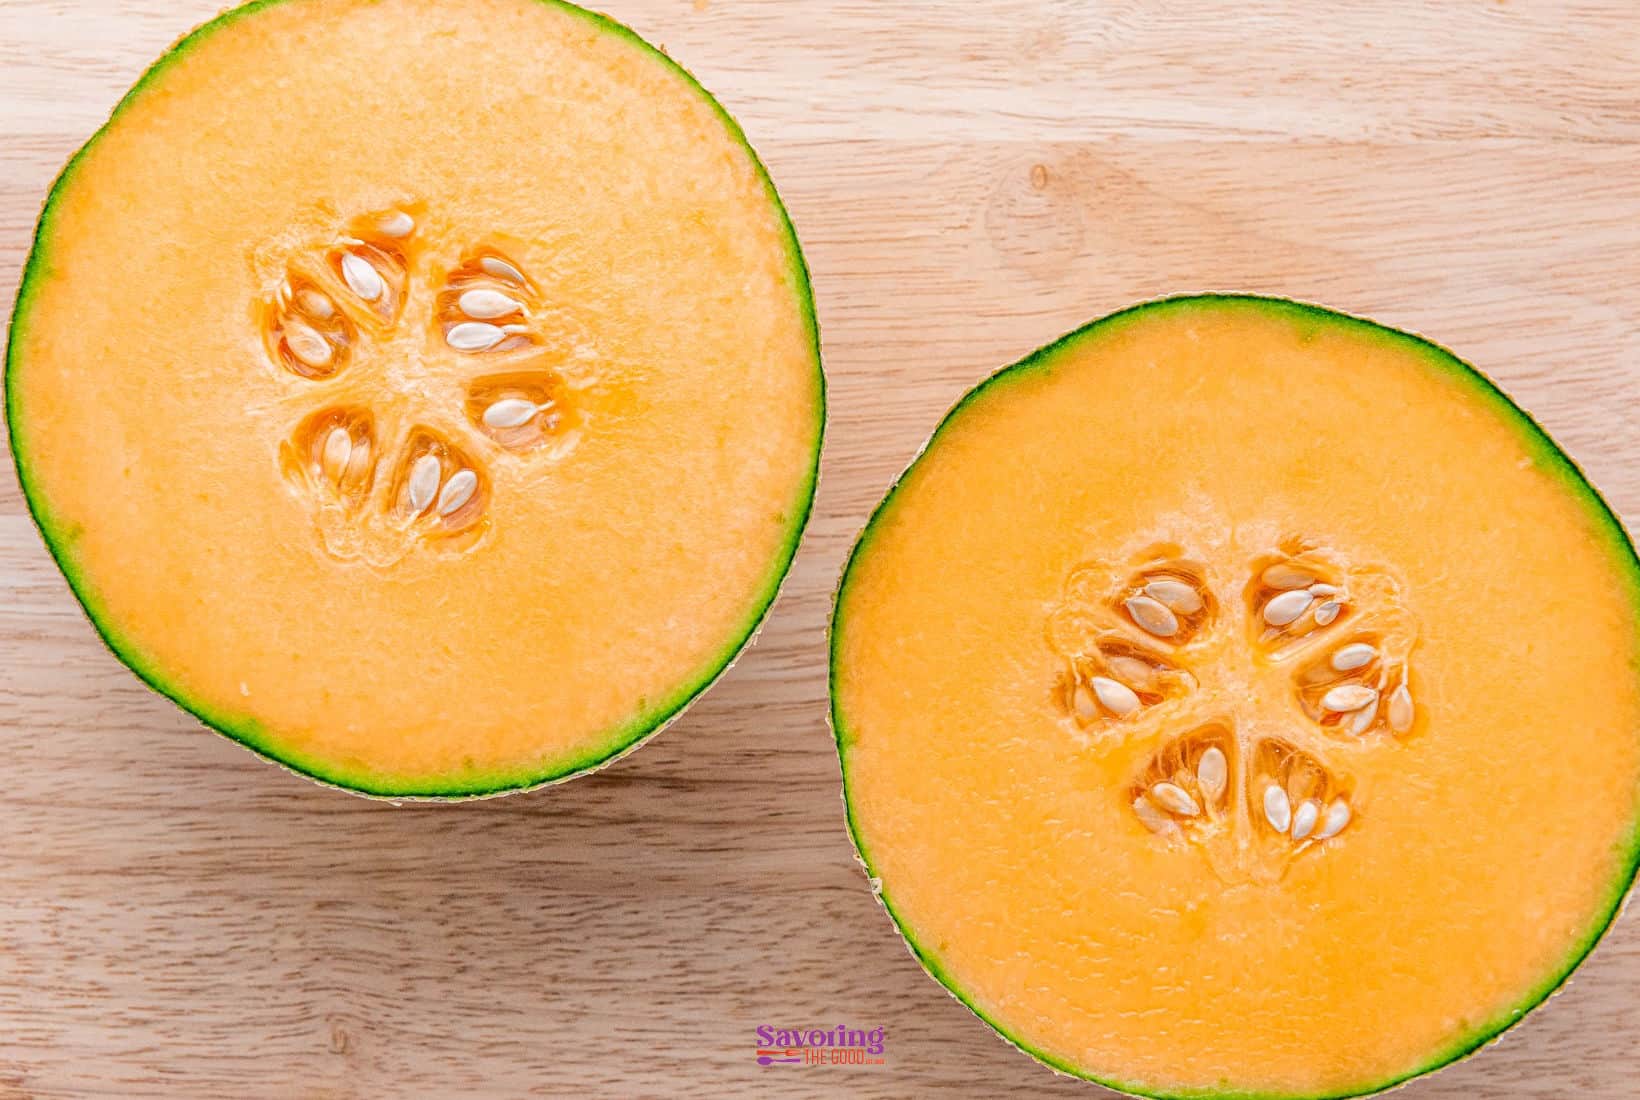 Two halves of a cantaloupe on a wooden surface.